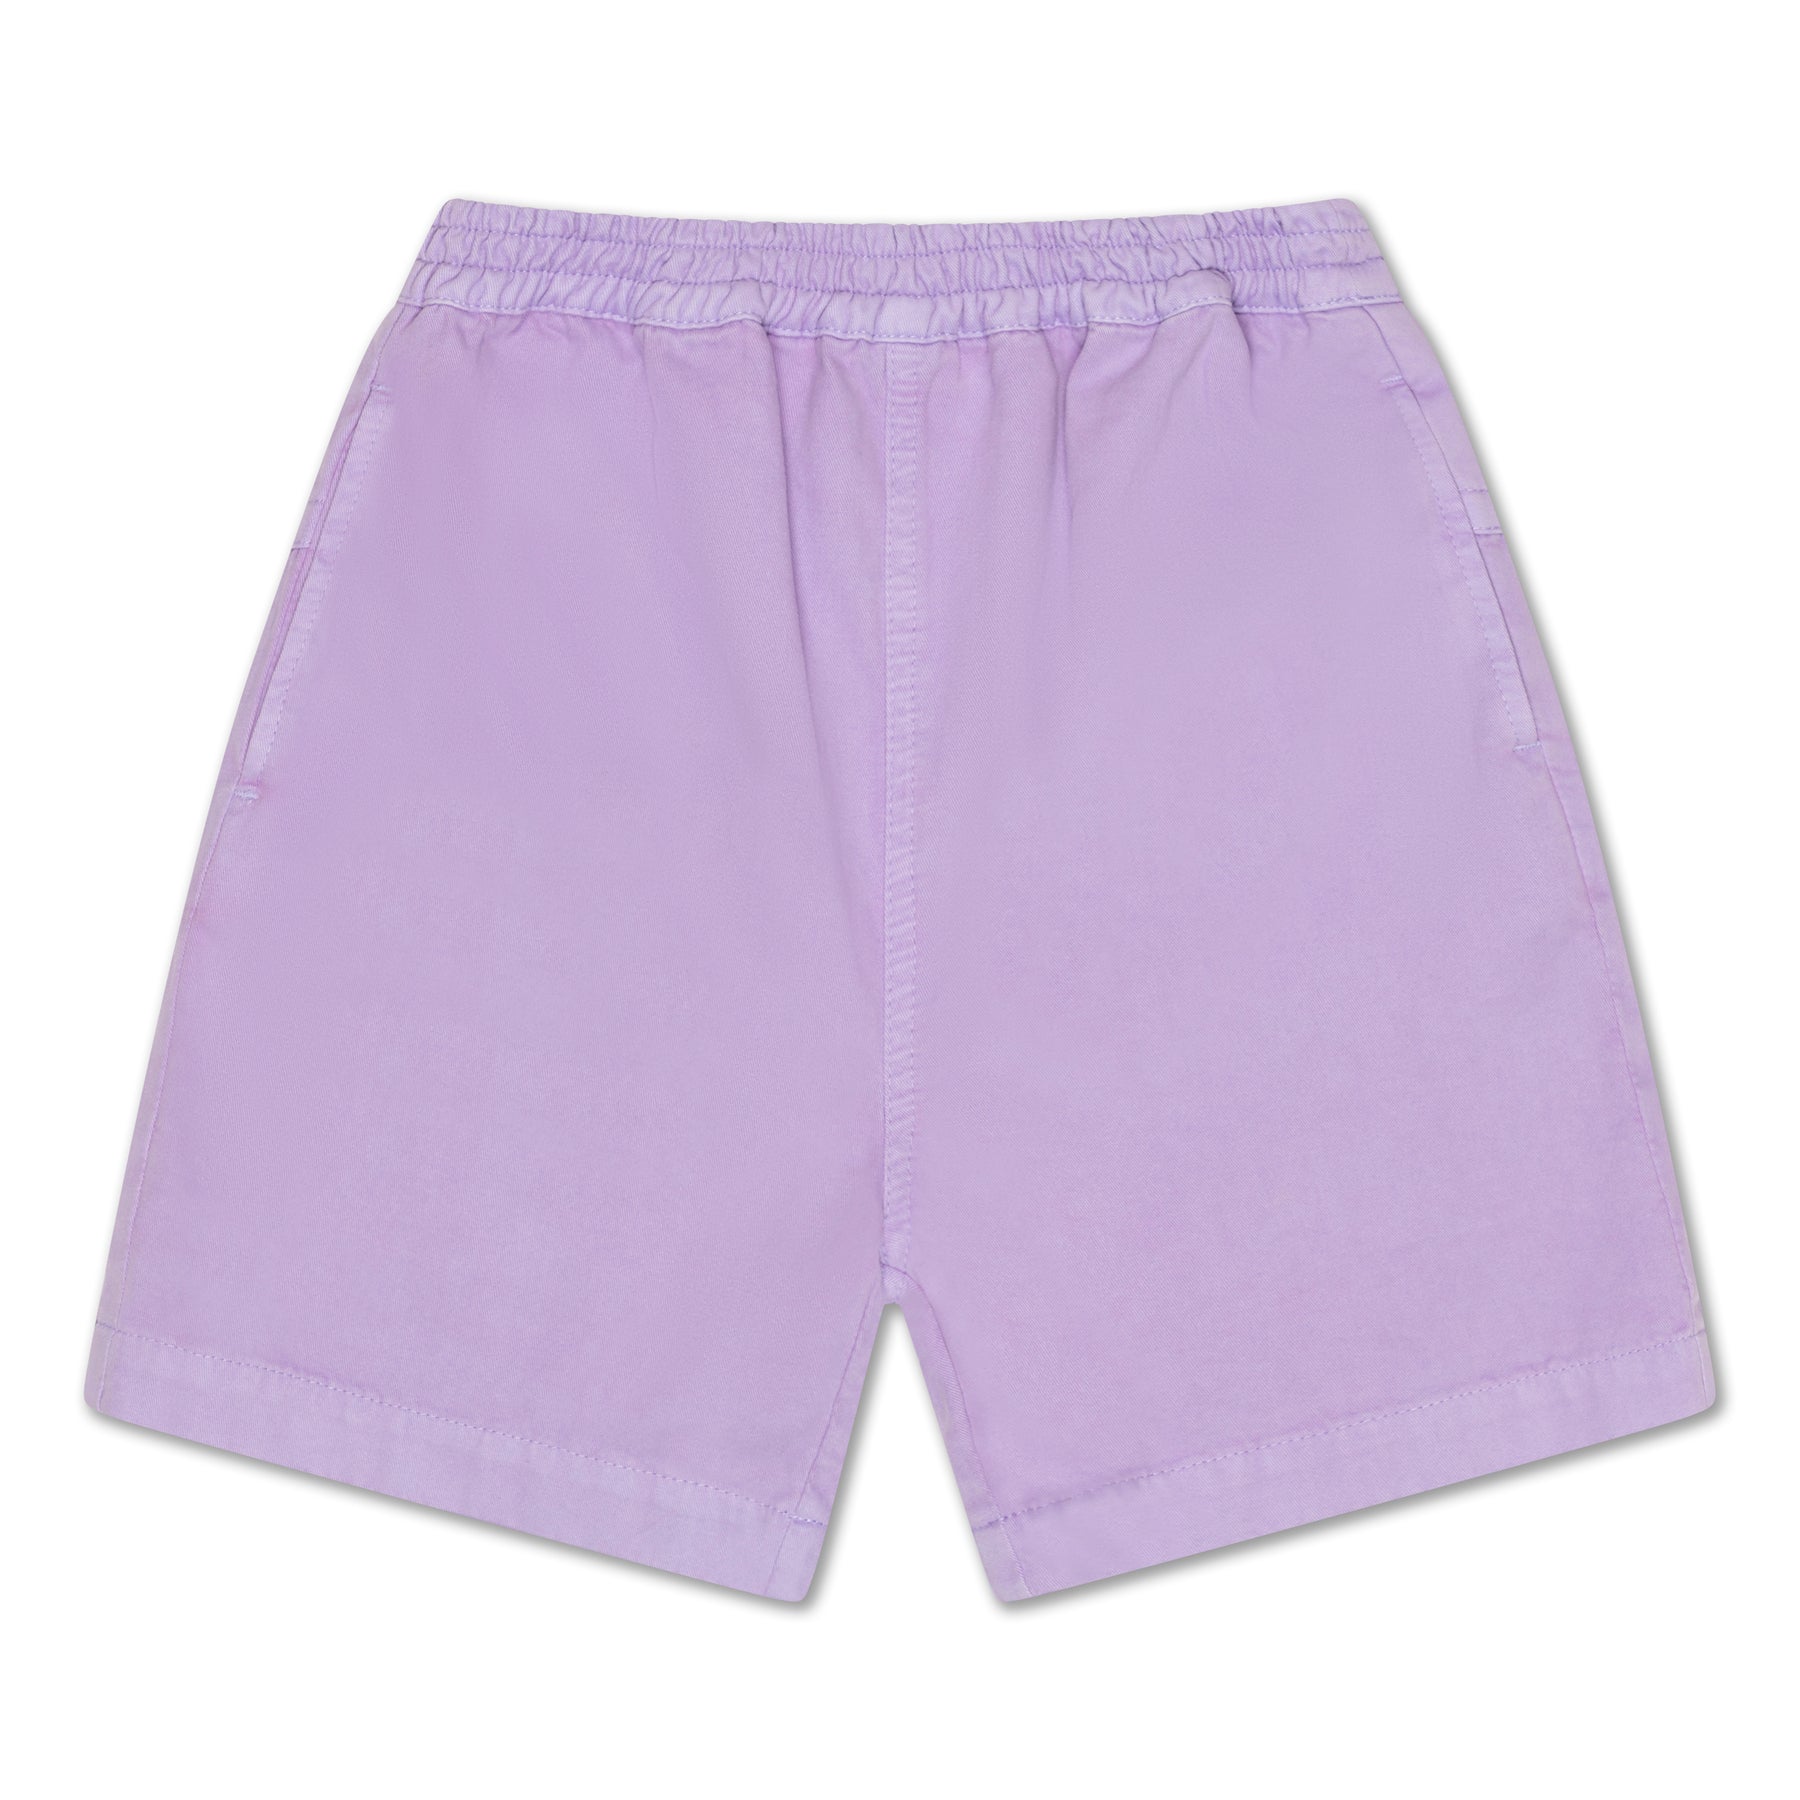 No sweat short | lilac orchid